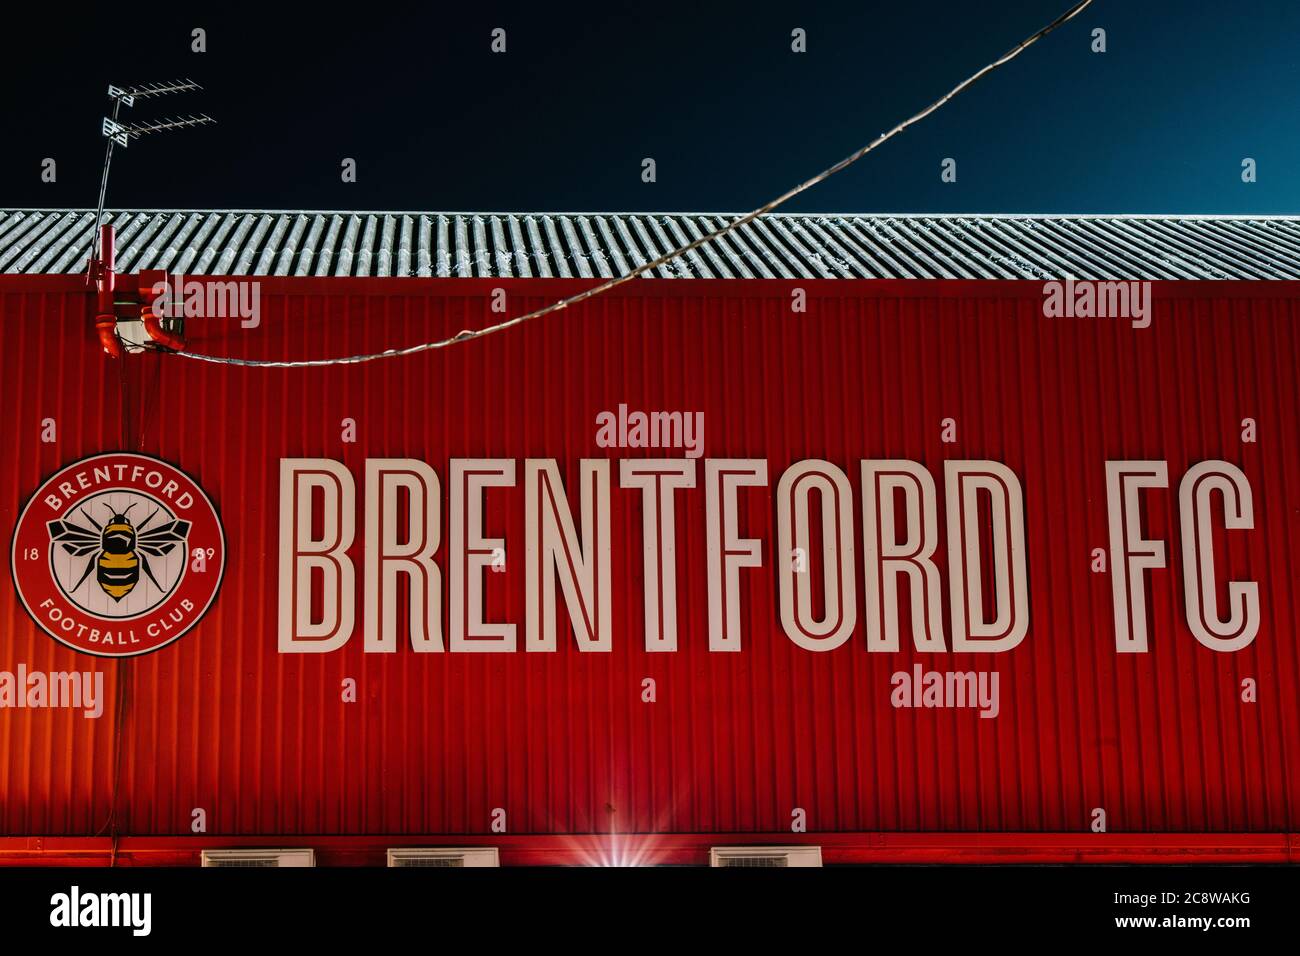 Brentford 1 Leeds United 1, 11/02/2020. Griffin Park, Championship. Photo by Simon Gill. Stock Photo